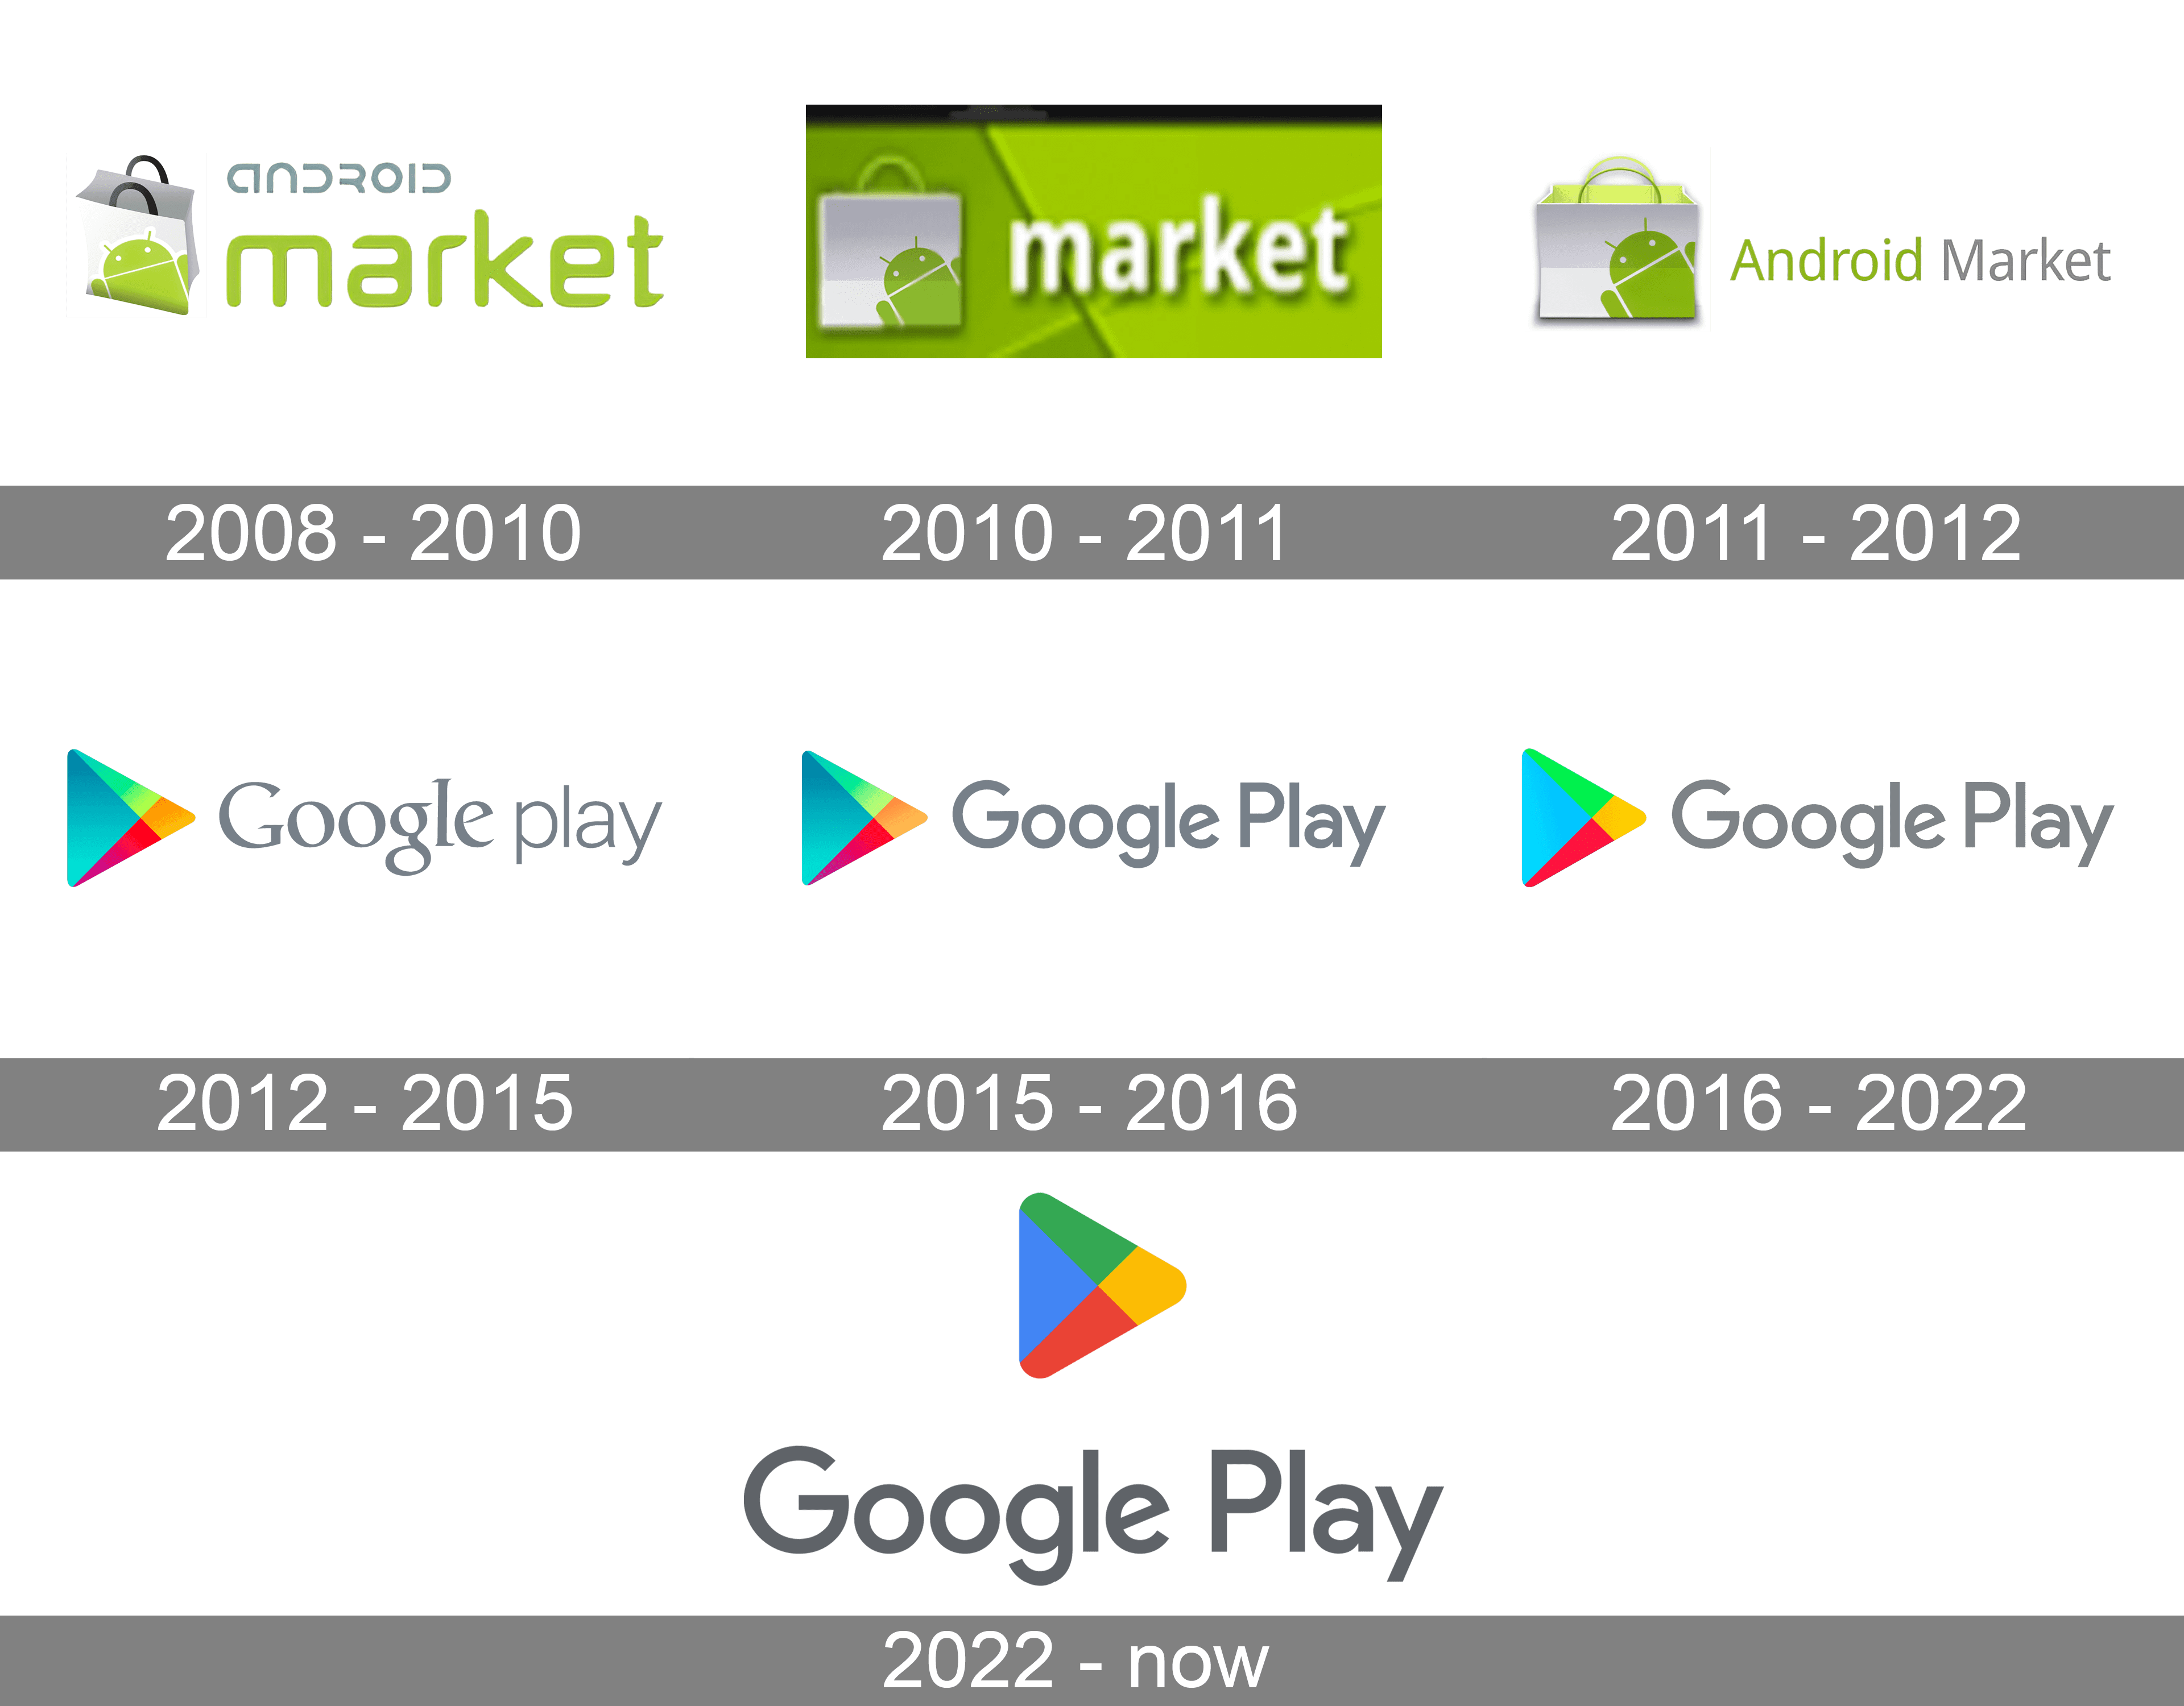 GUESS THE FOOTBALL CLUB 2023 - Apps on Google Play